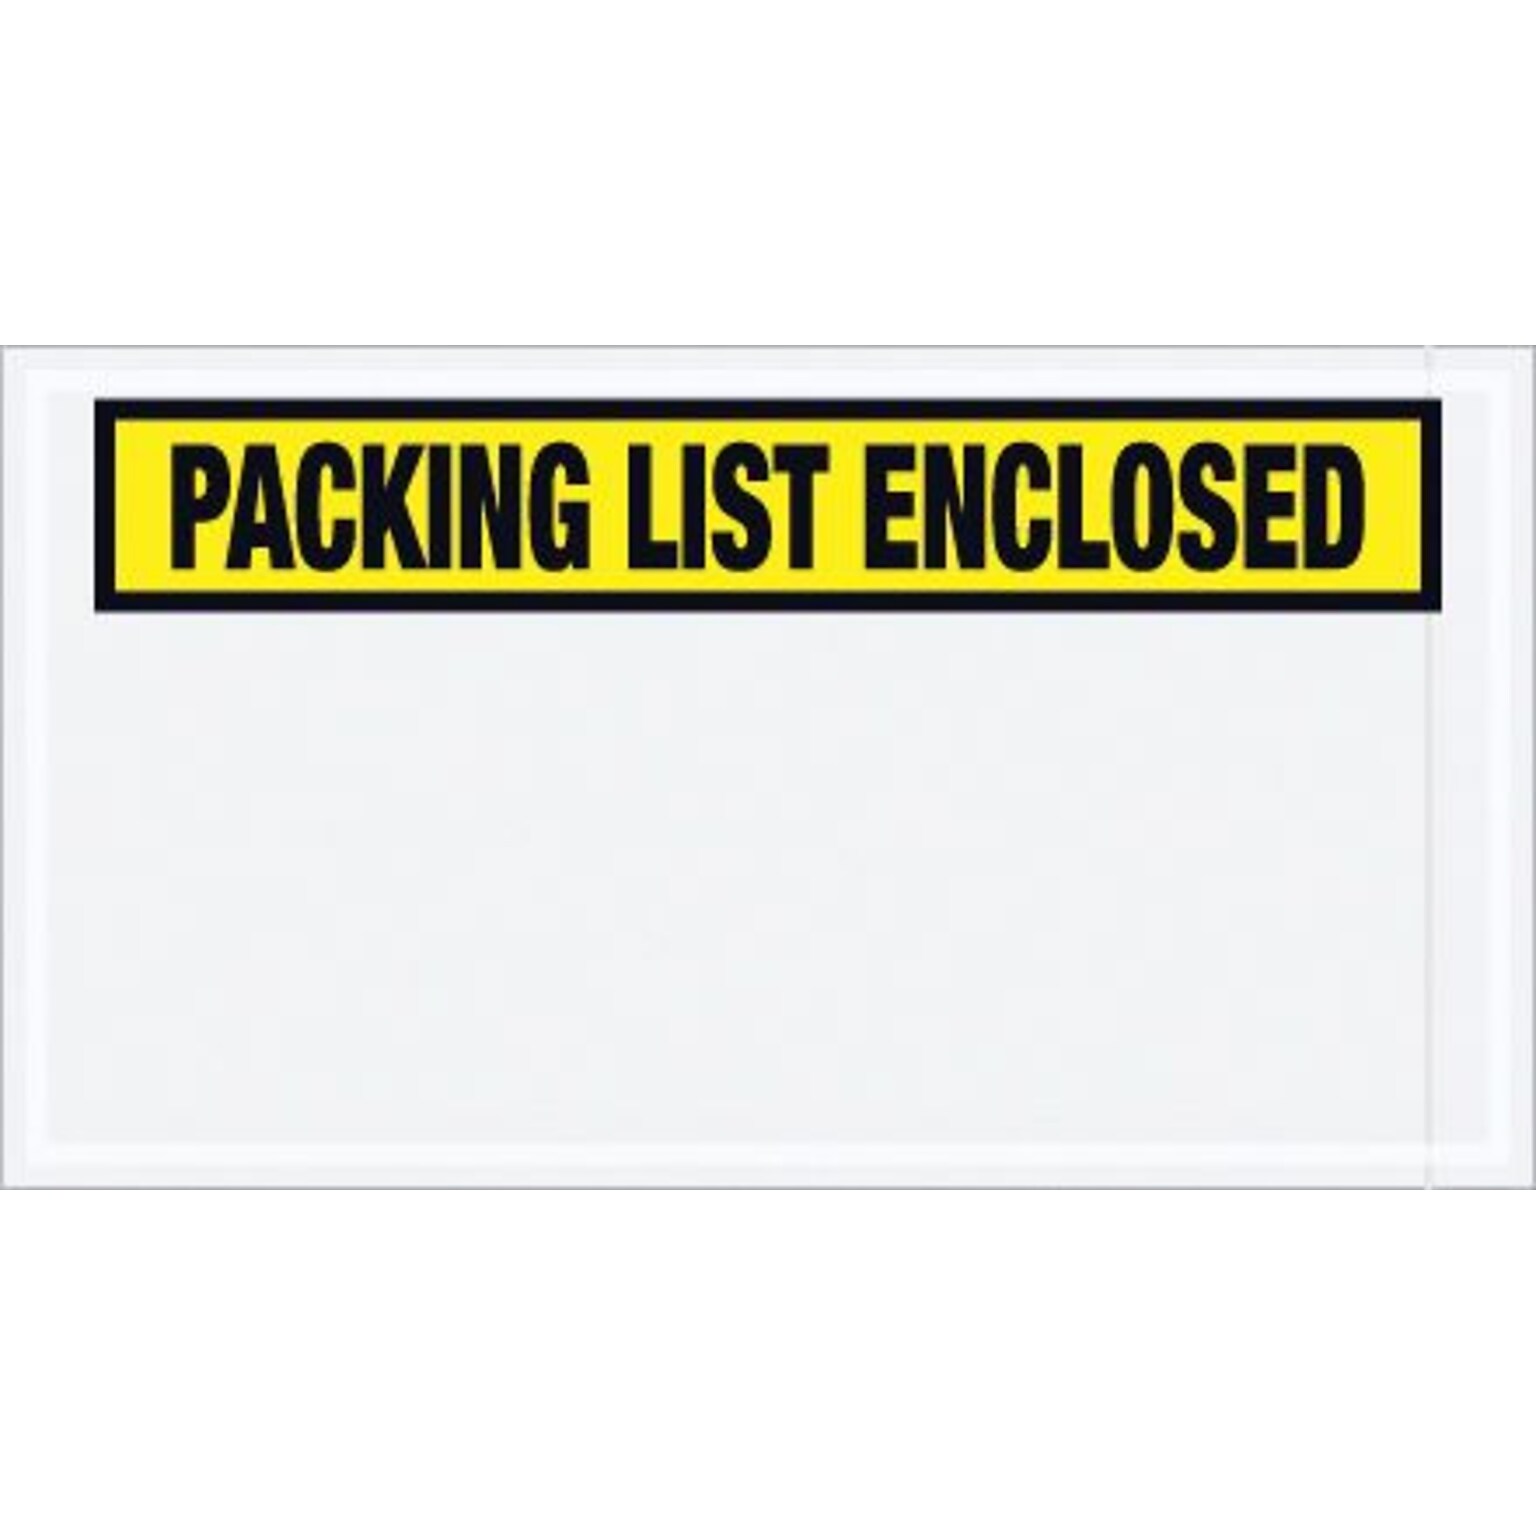 Quill Brand® Packing List Envelope, 5.5 x 10, Yellow Panel Face, Packing List Enclosed, 1000/Case (PL445)